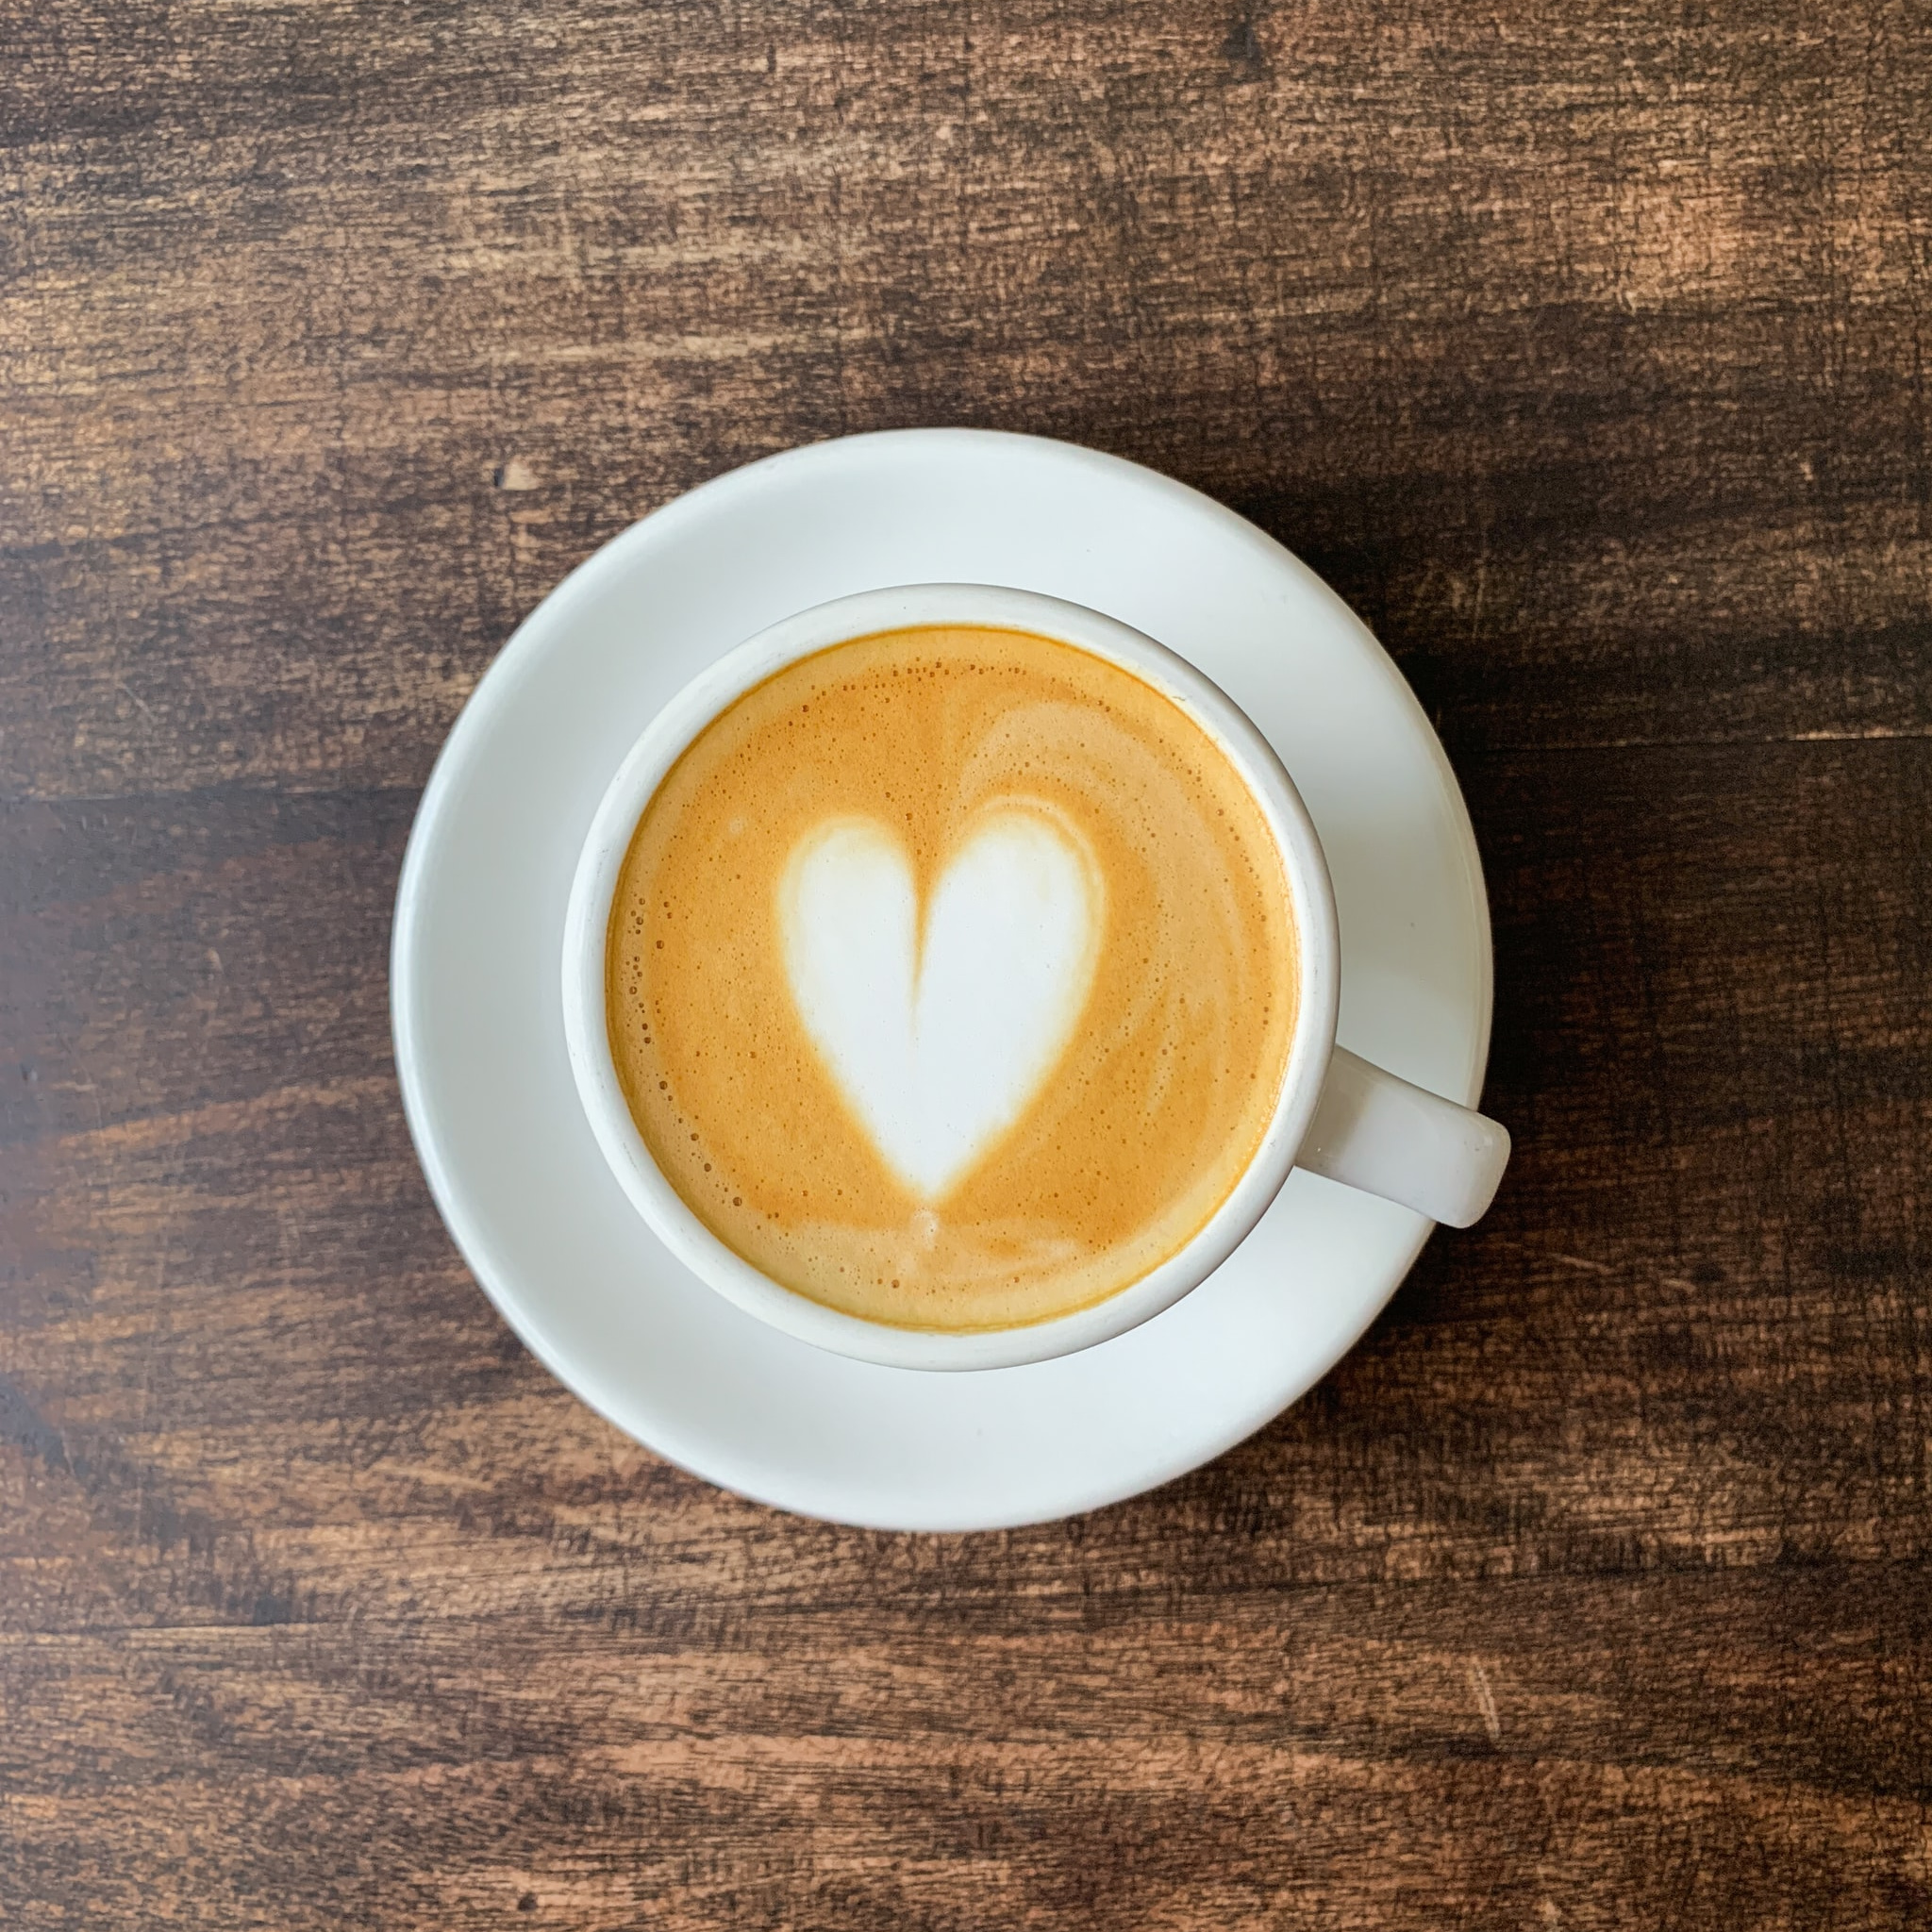 The image of a cup of coffee with a heart drawn on it